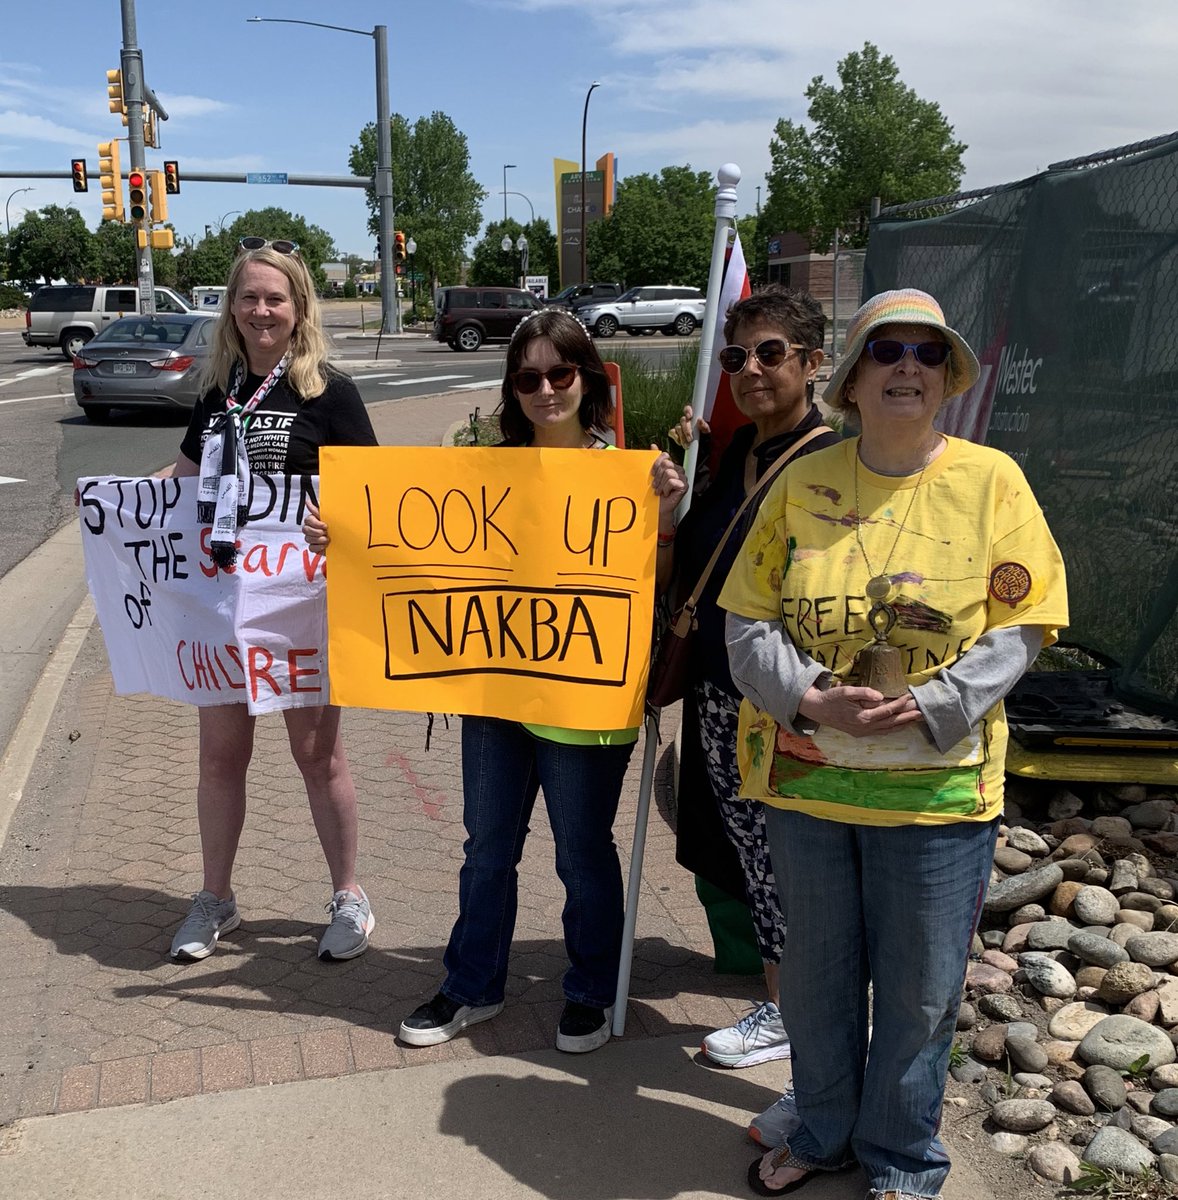 Did you miss out on last week’s peace vigil? Don’t worry, we will be out there again this Saturday. We must raise our voices and stand up against genocide. Join us this Saturday at 10:30 at 52nd and Wads in Arvada. #copolitics #freepalestine #endthegenocide